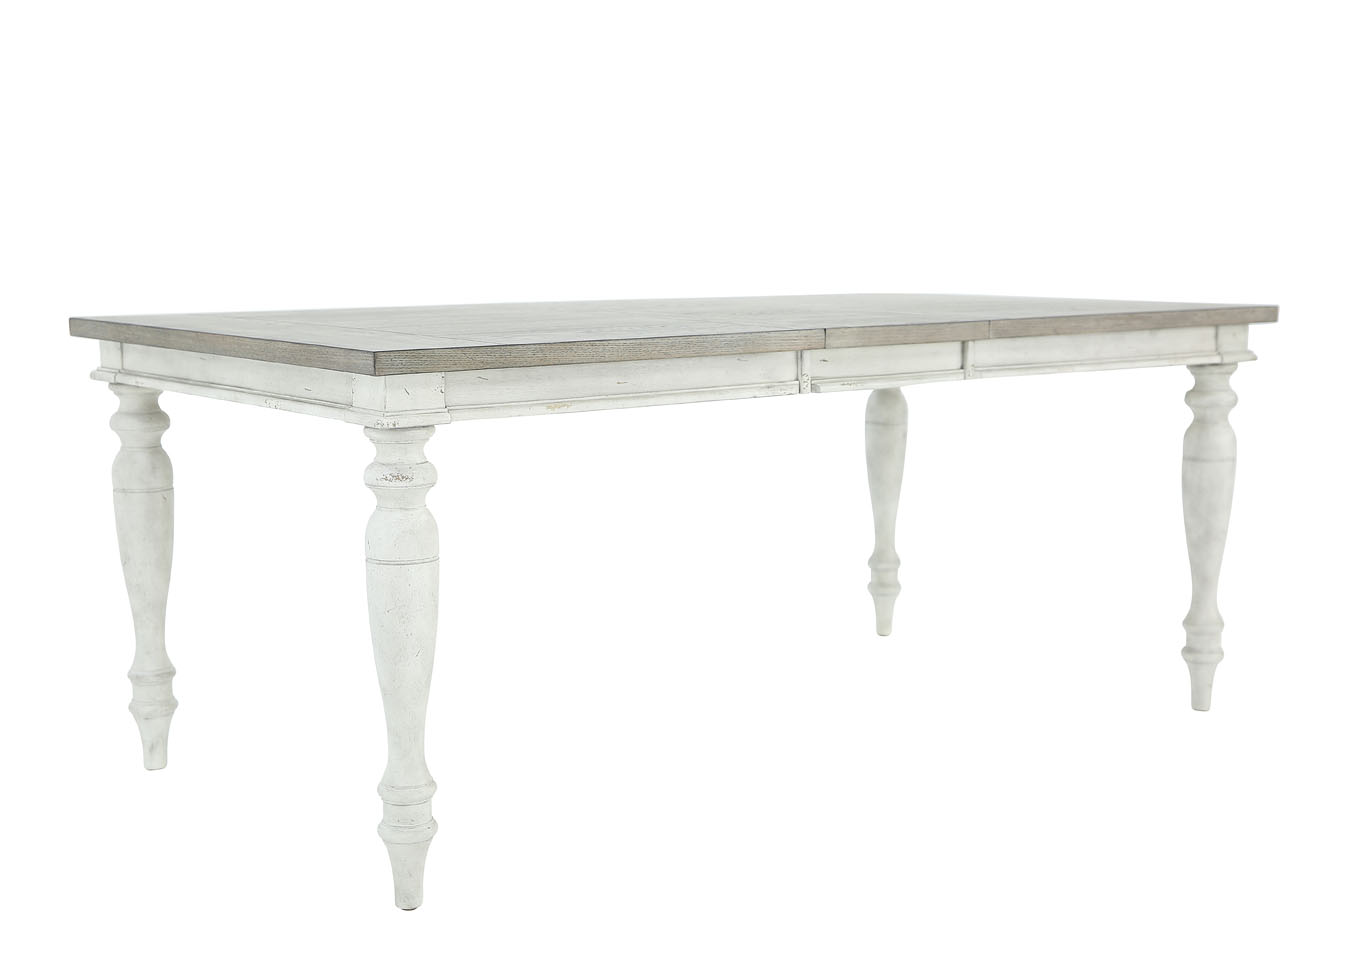 WHITNEY DINING TABLE,LIBERTY FURNITURE